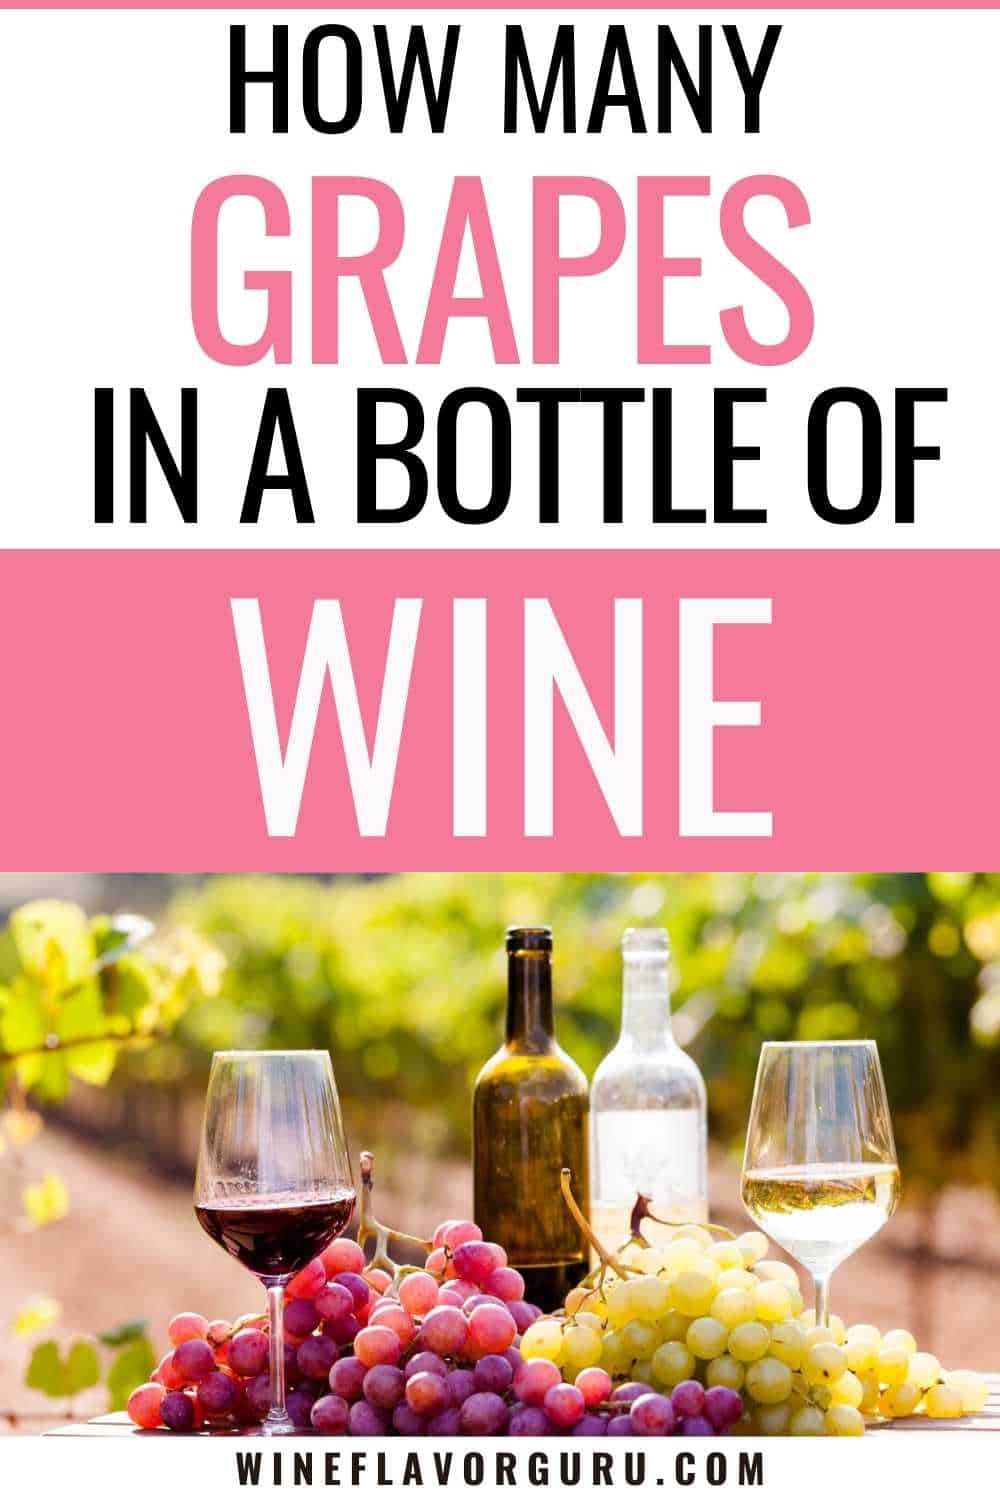 How Many Grapes in a Bottle of Wine?